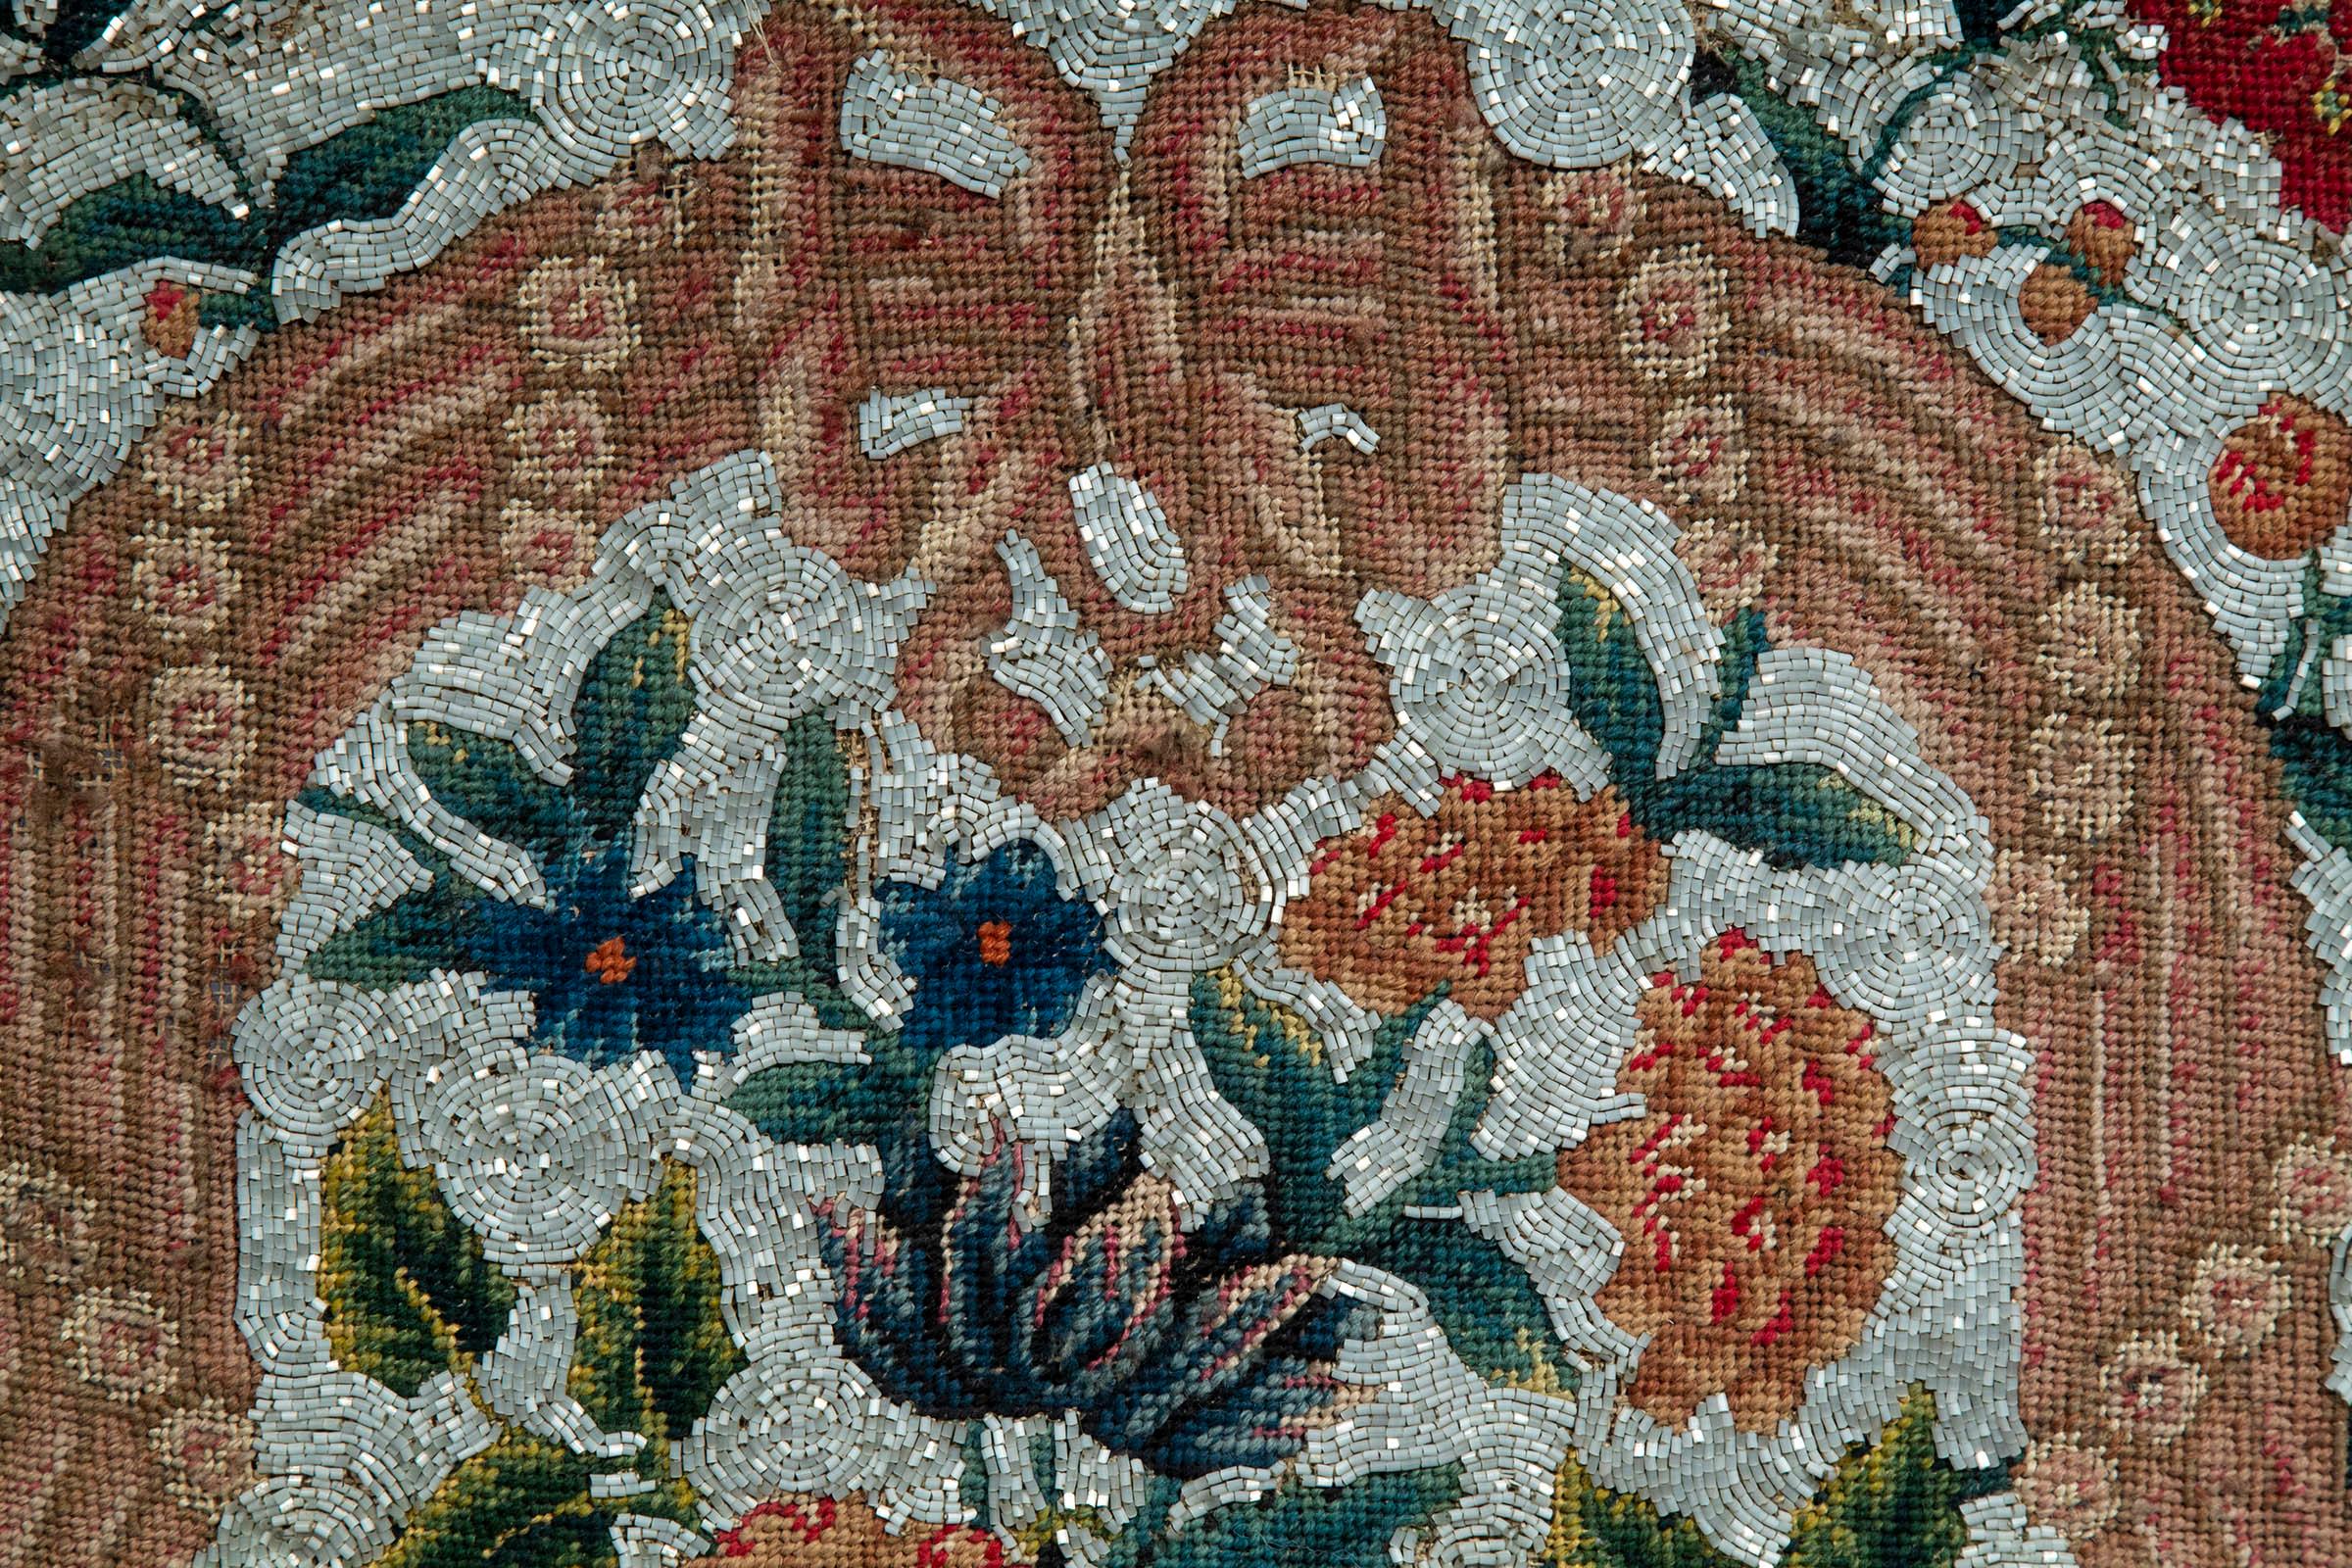 An exquisite early 19th century gros-point and beadwork tapestry picture, in antique parquetry frame.

Size of the panel: 20.75 in / 52.5 cm by 21.25 in / 54 cm.